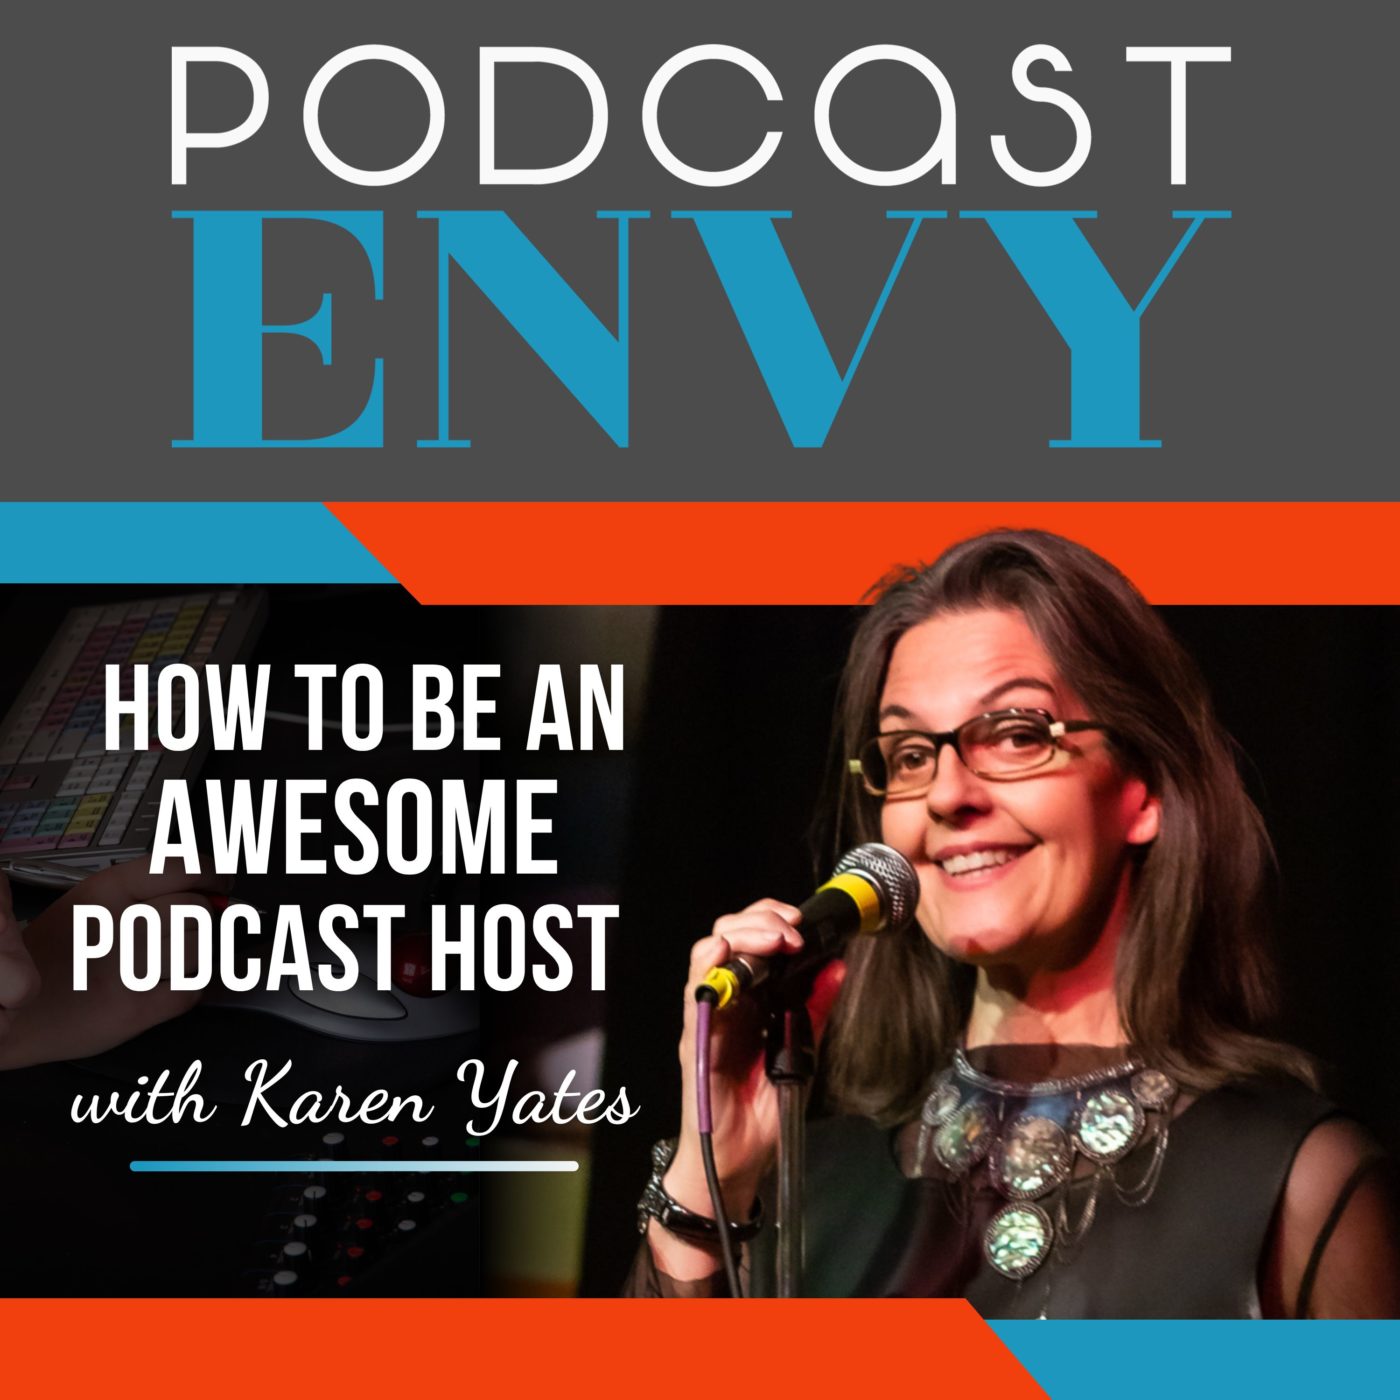 How To Be An Awesome Podcast Host Featuring Karen Yates